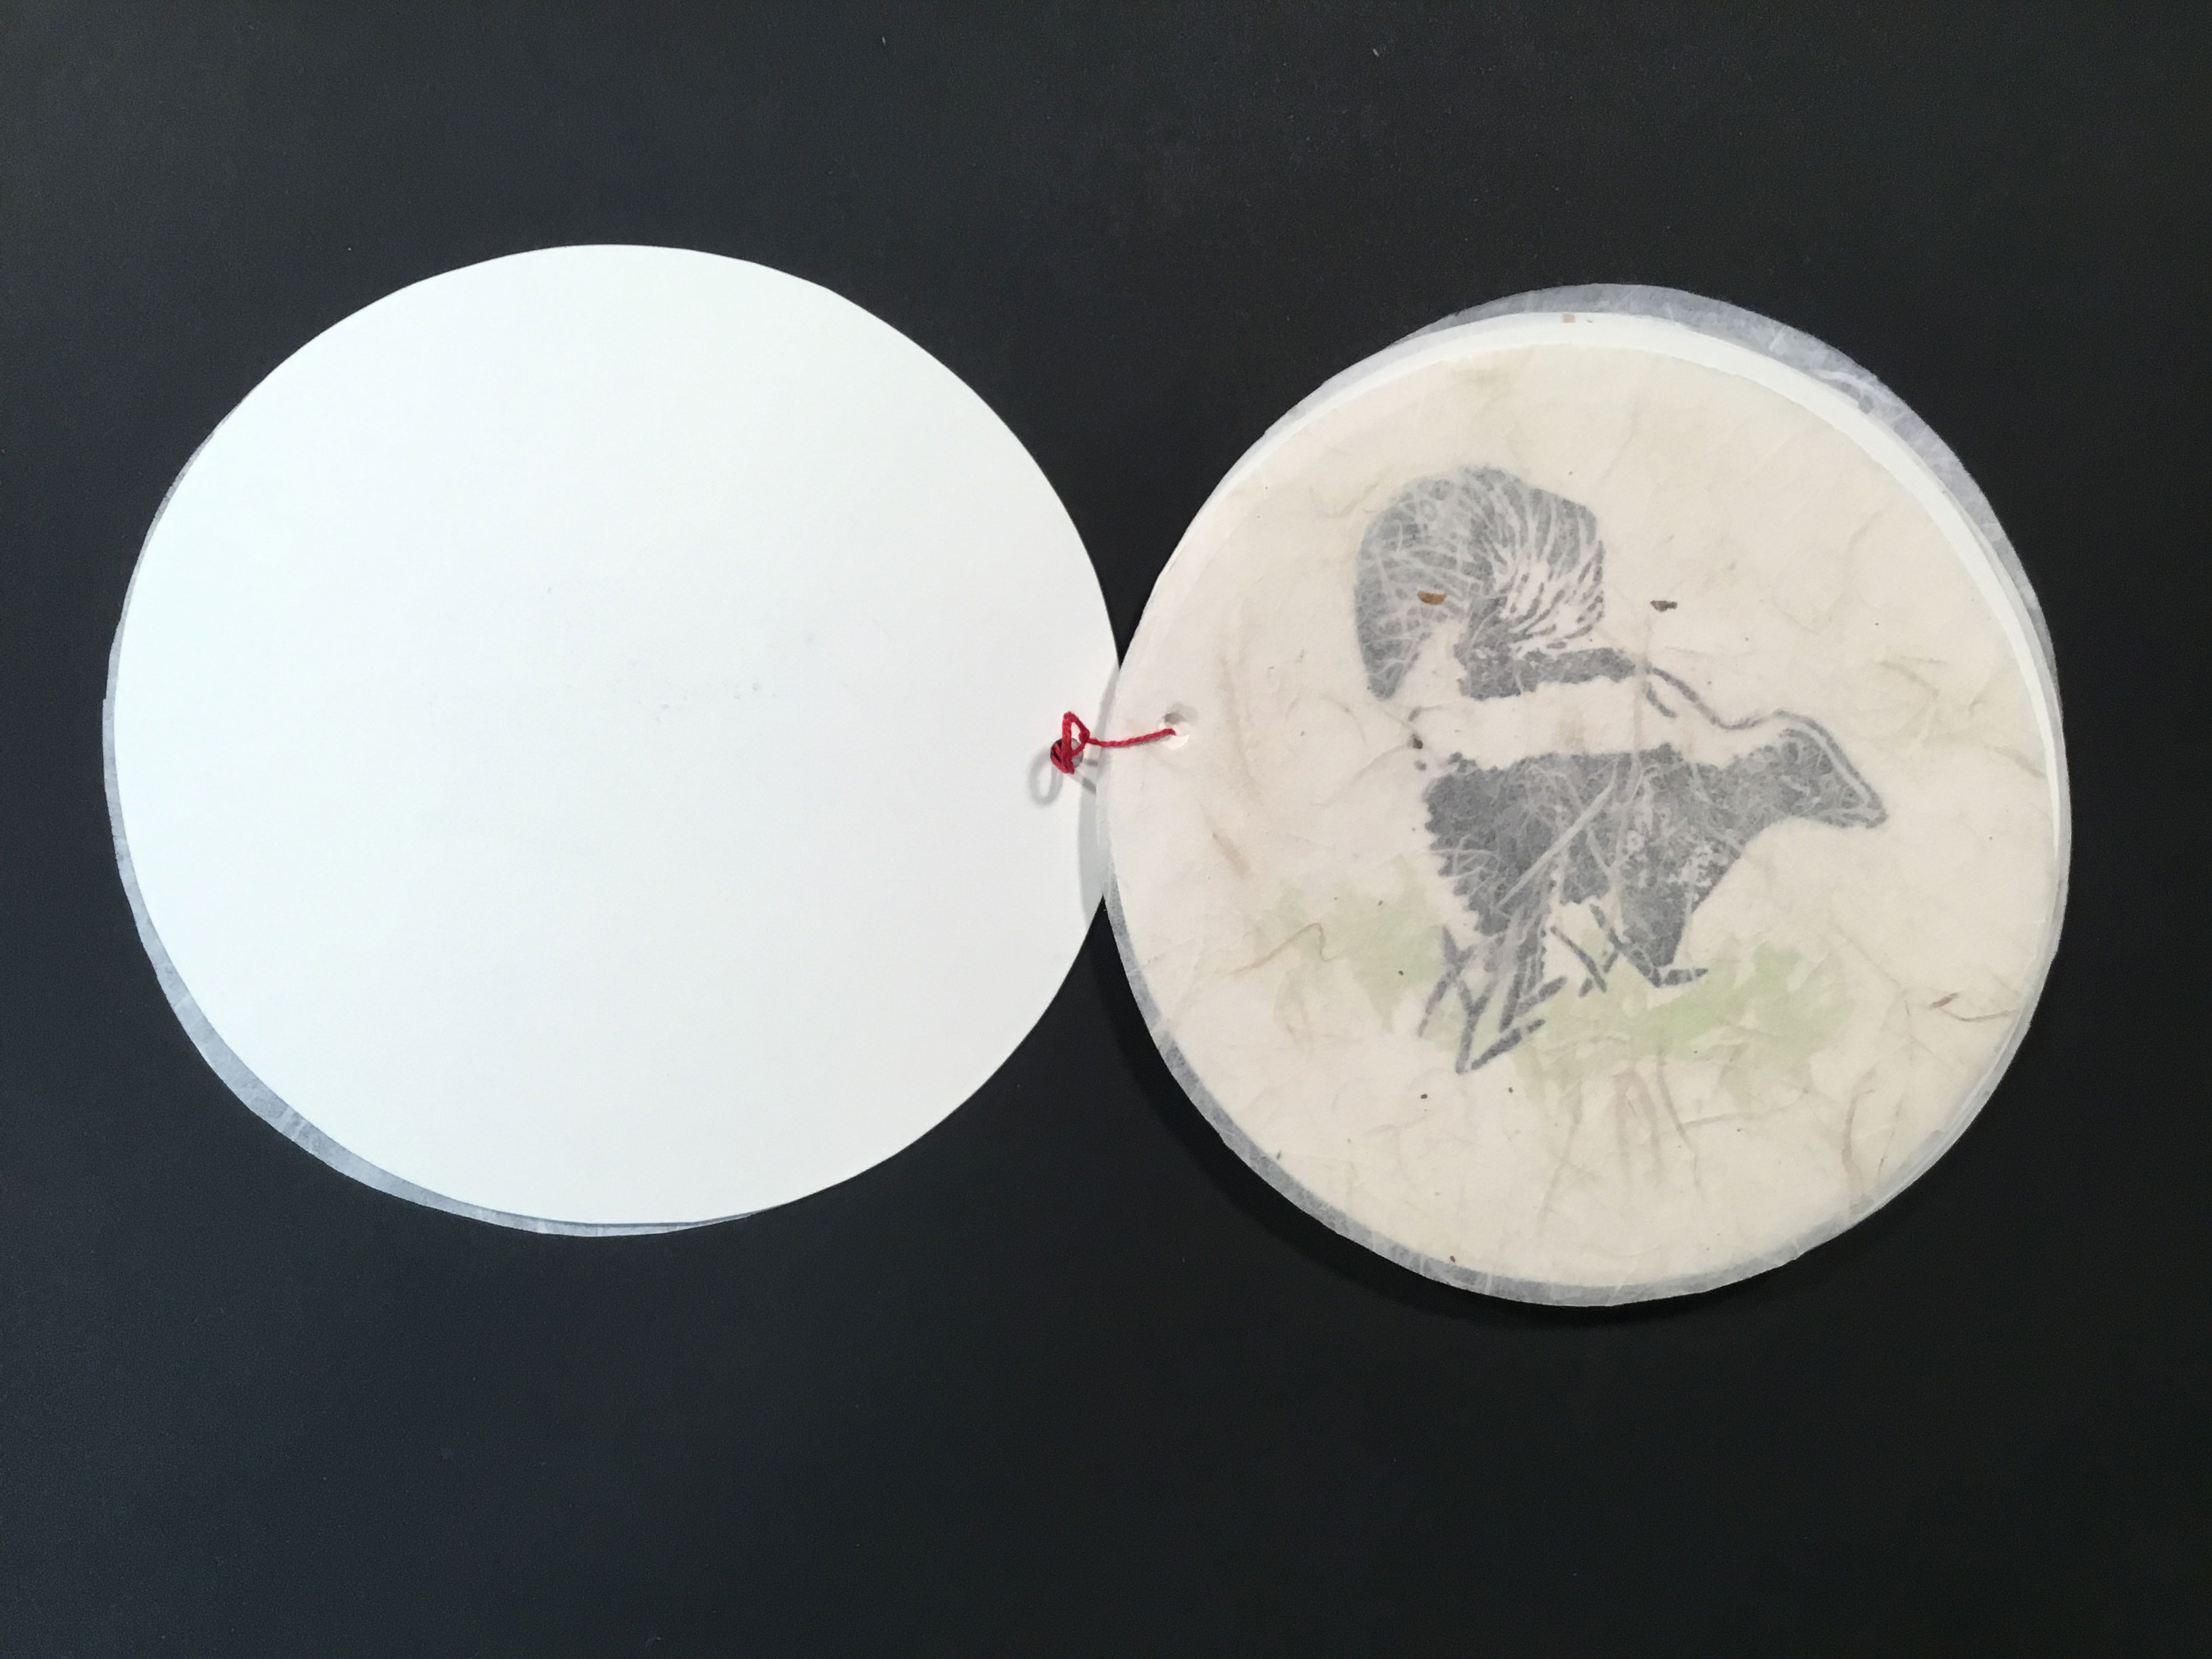 A thin, circular sheet of translucent paper with floral and plant-like embeds covers a painted image of a skunk in a patch of grass.